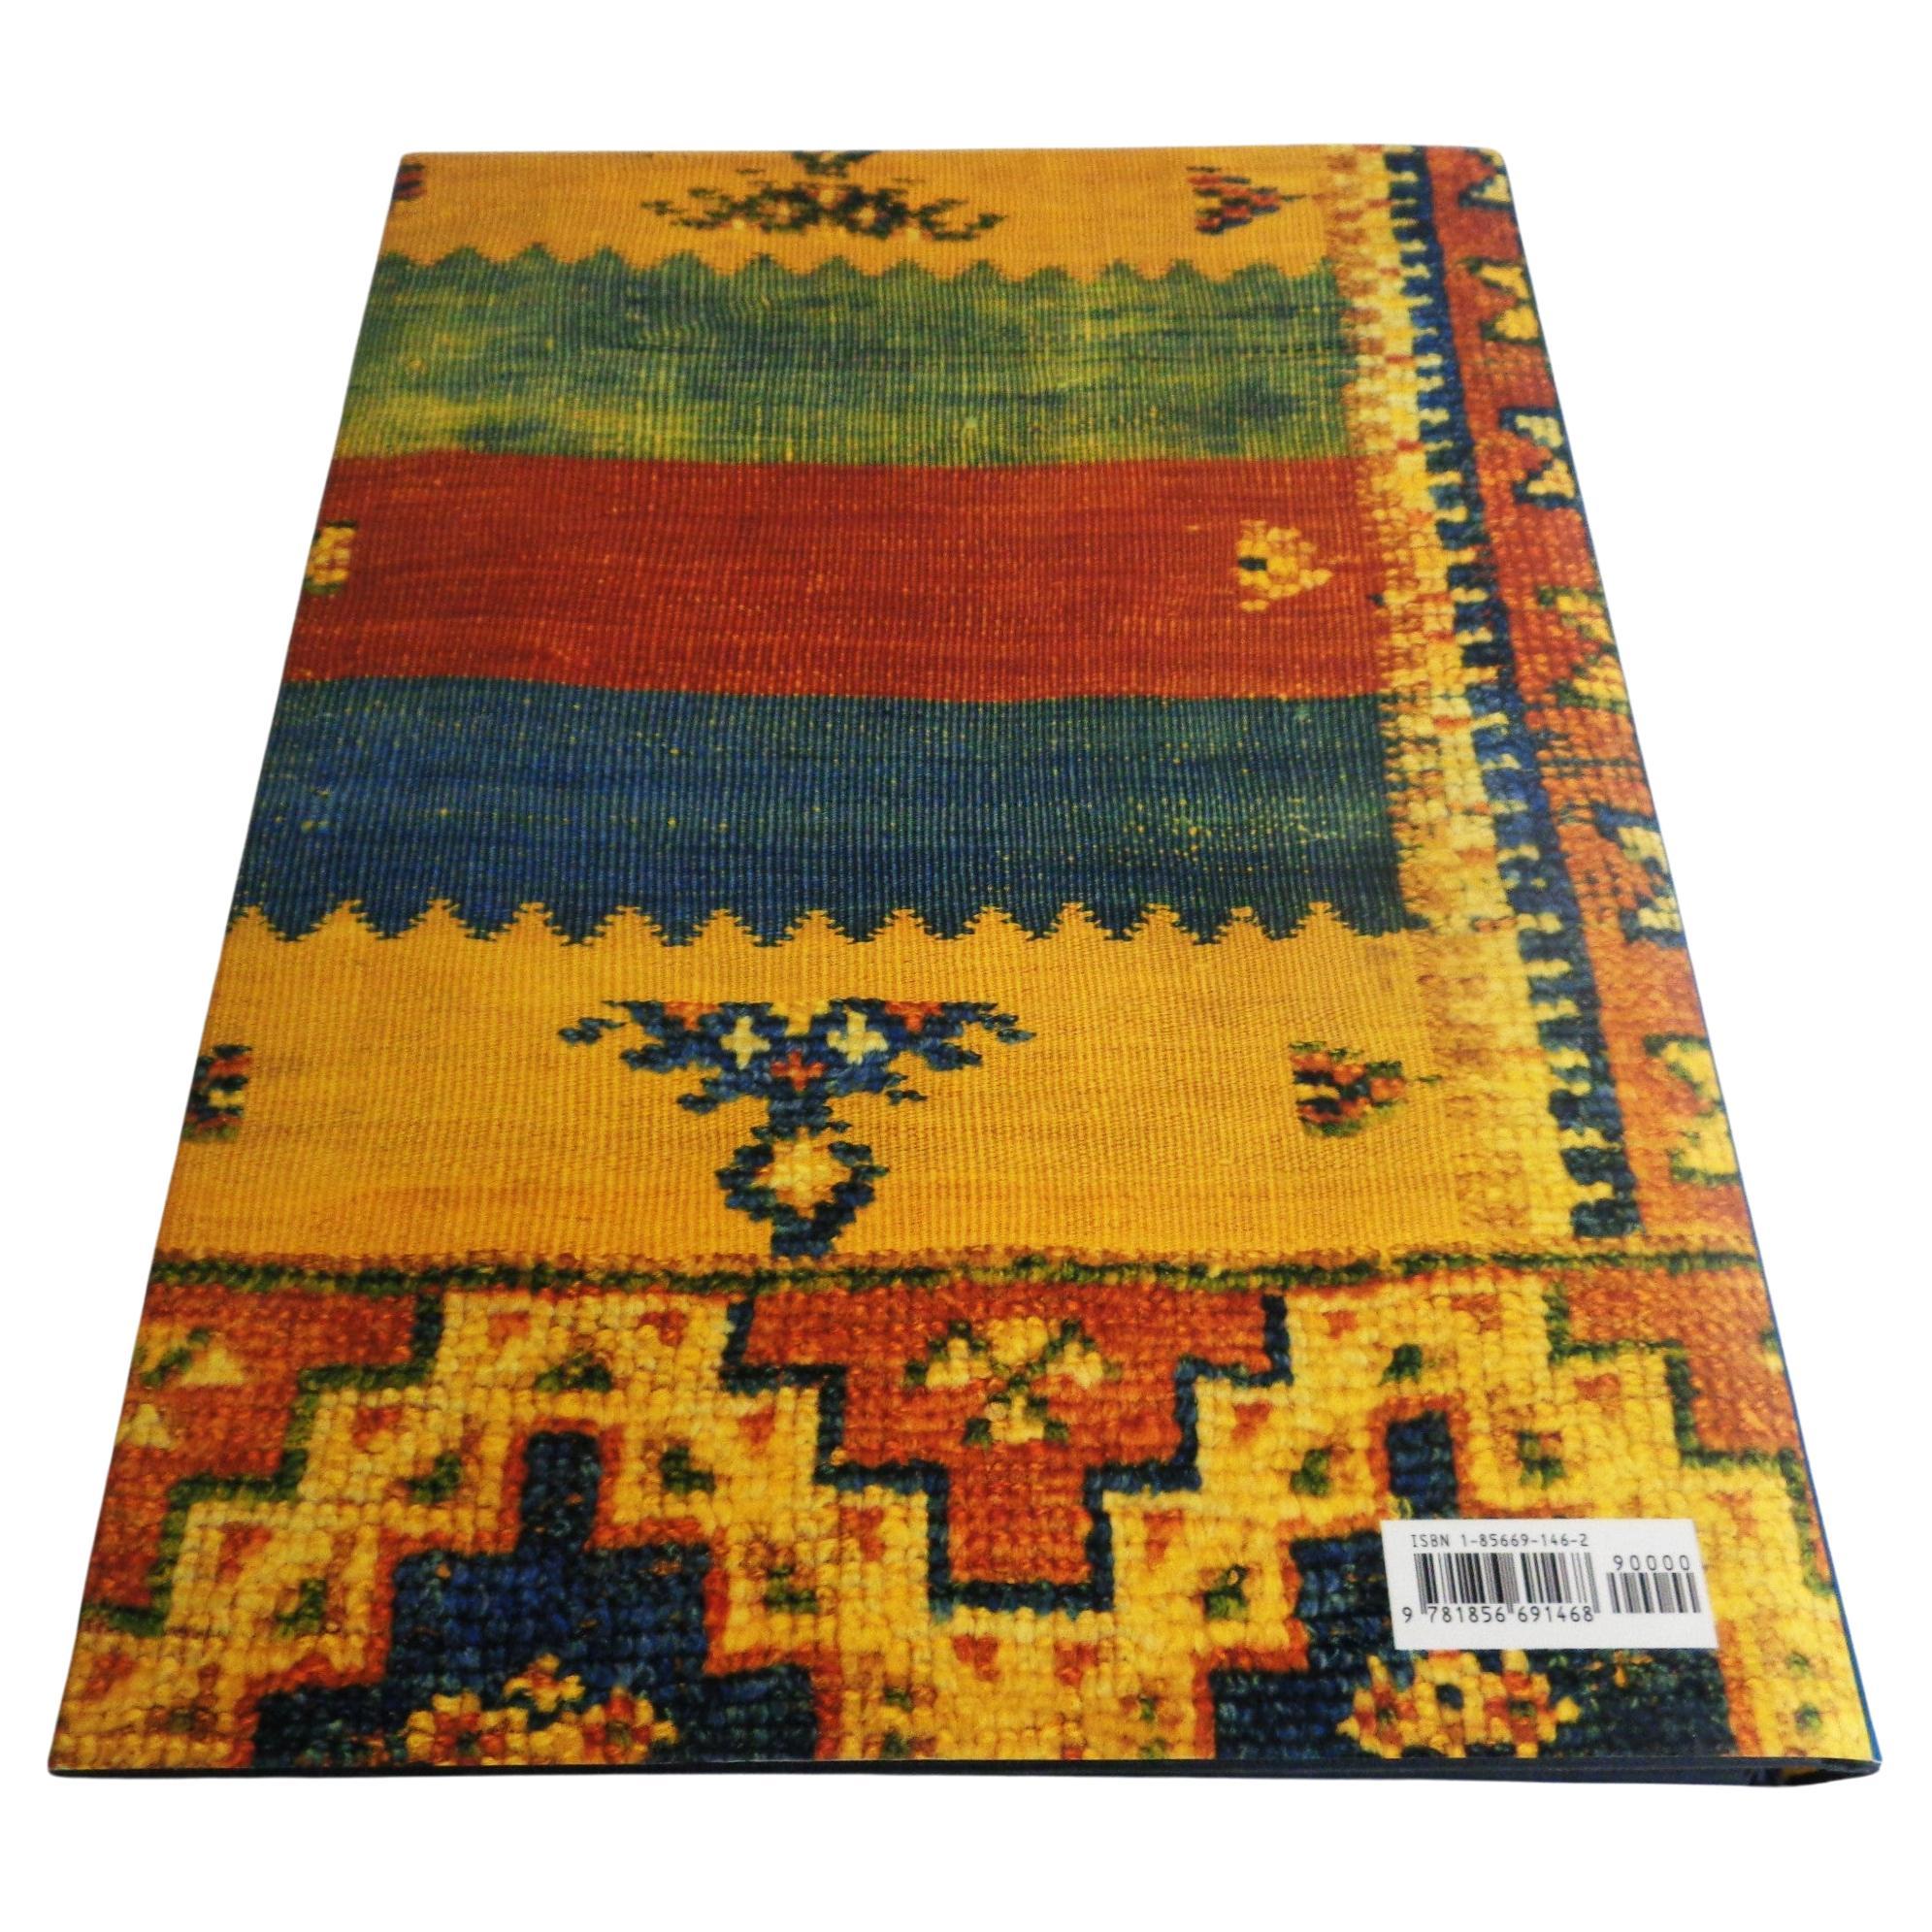  Moroccan Carpets: Pickering, Pickering, Yohe - Laurence King Hali Publications In Good Condition For Sale In Rochester, NY